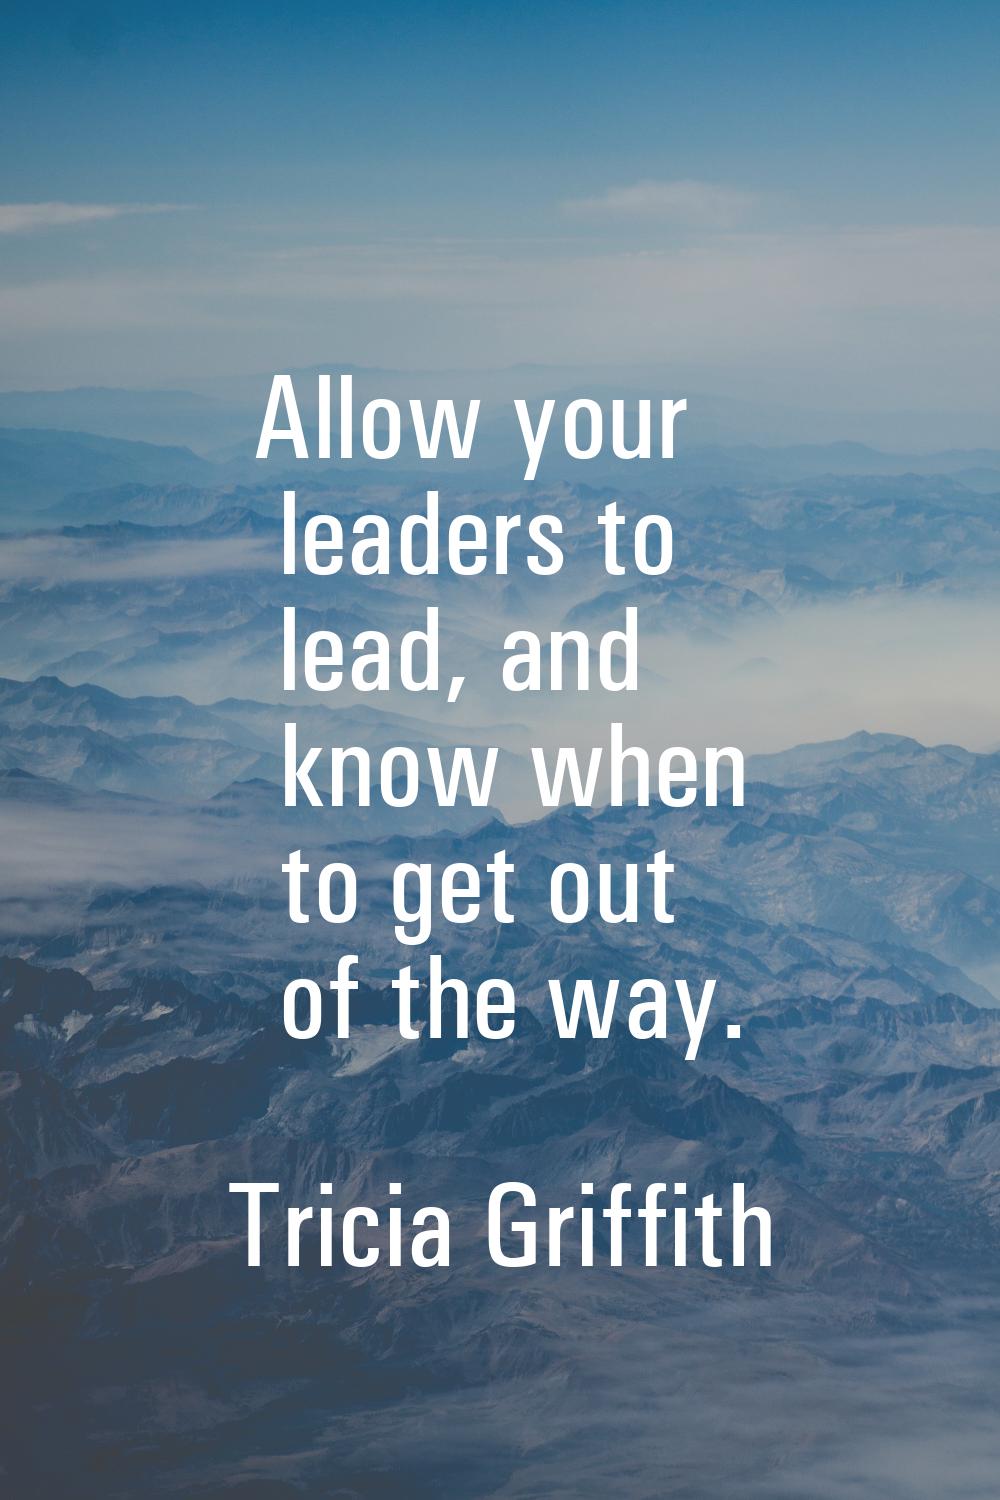 Allow your leaders to lead, and know when to get out of the way.